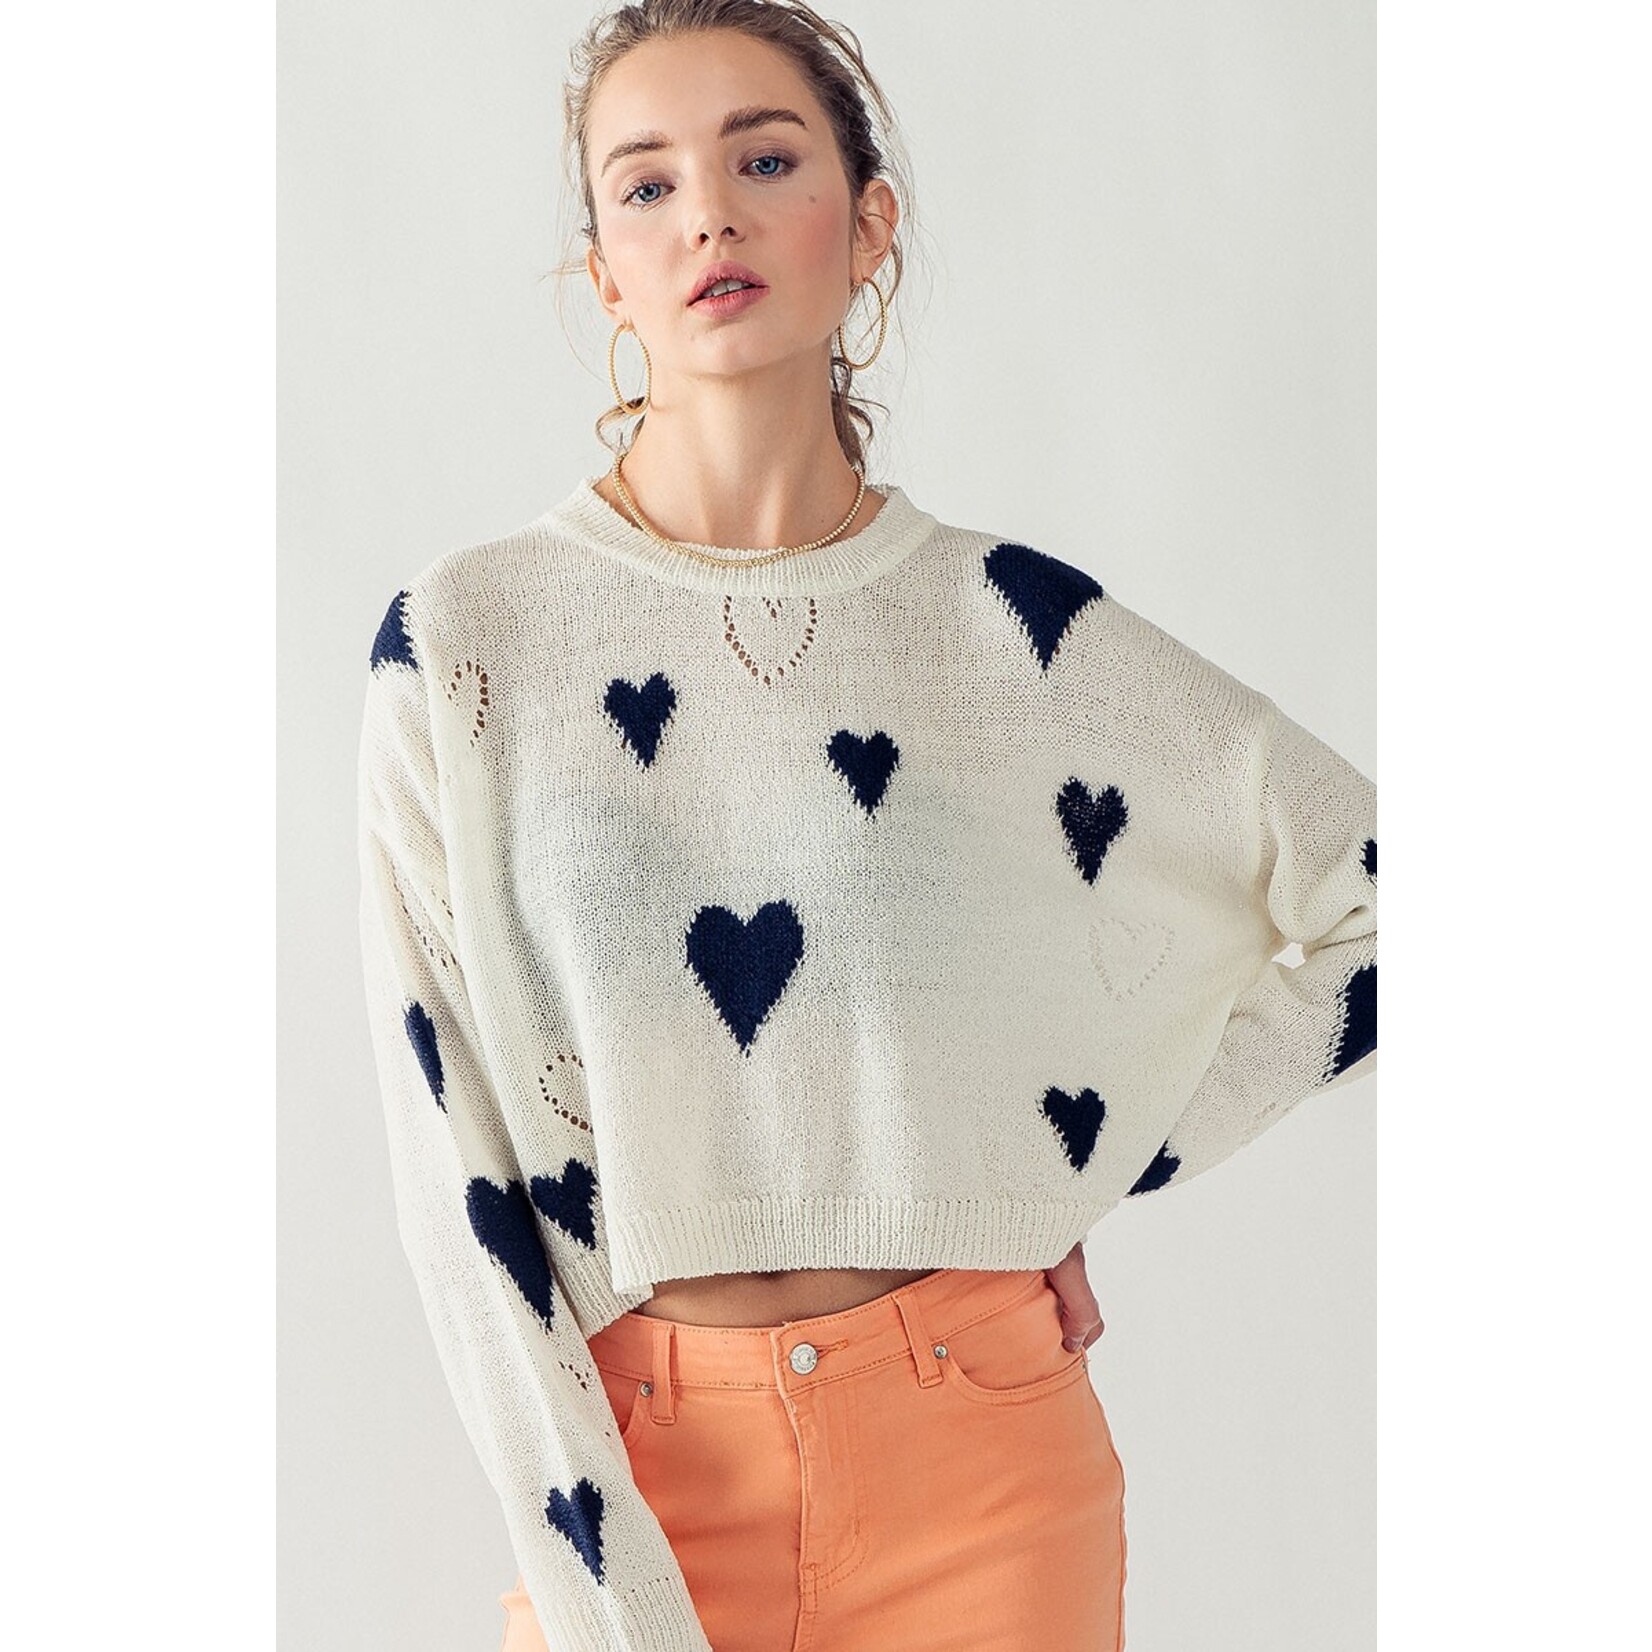 Trend Notes Heart Shape Hollow Out Sweater